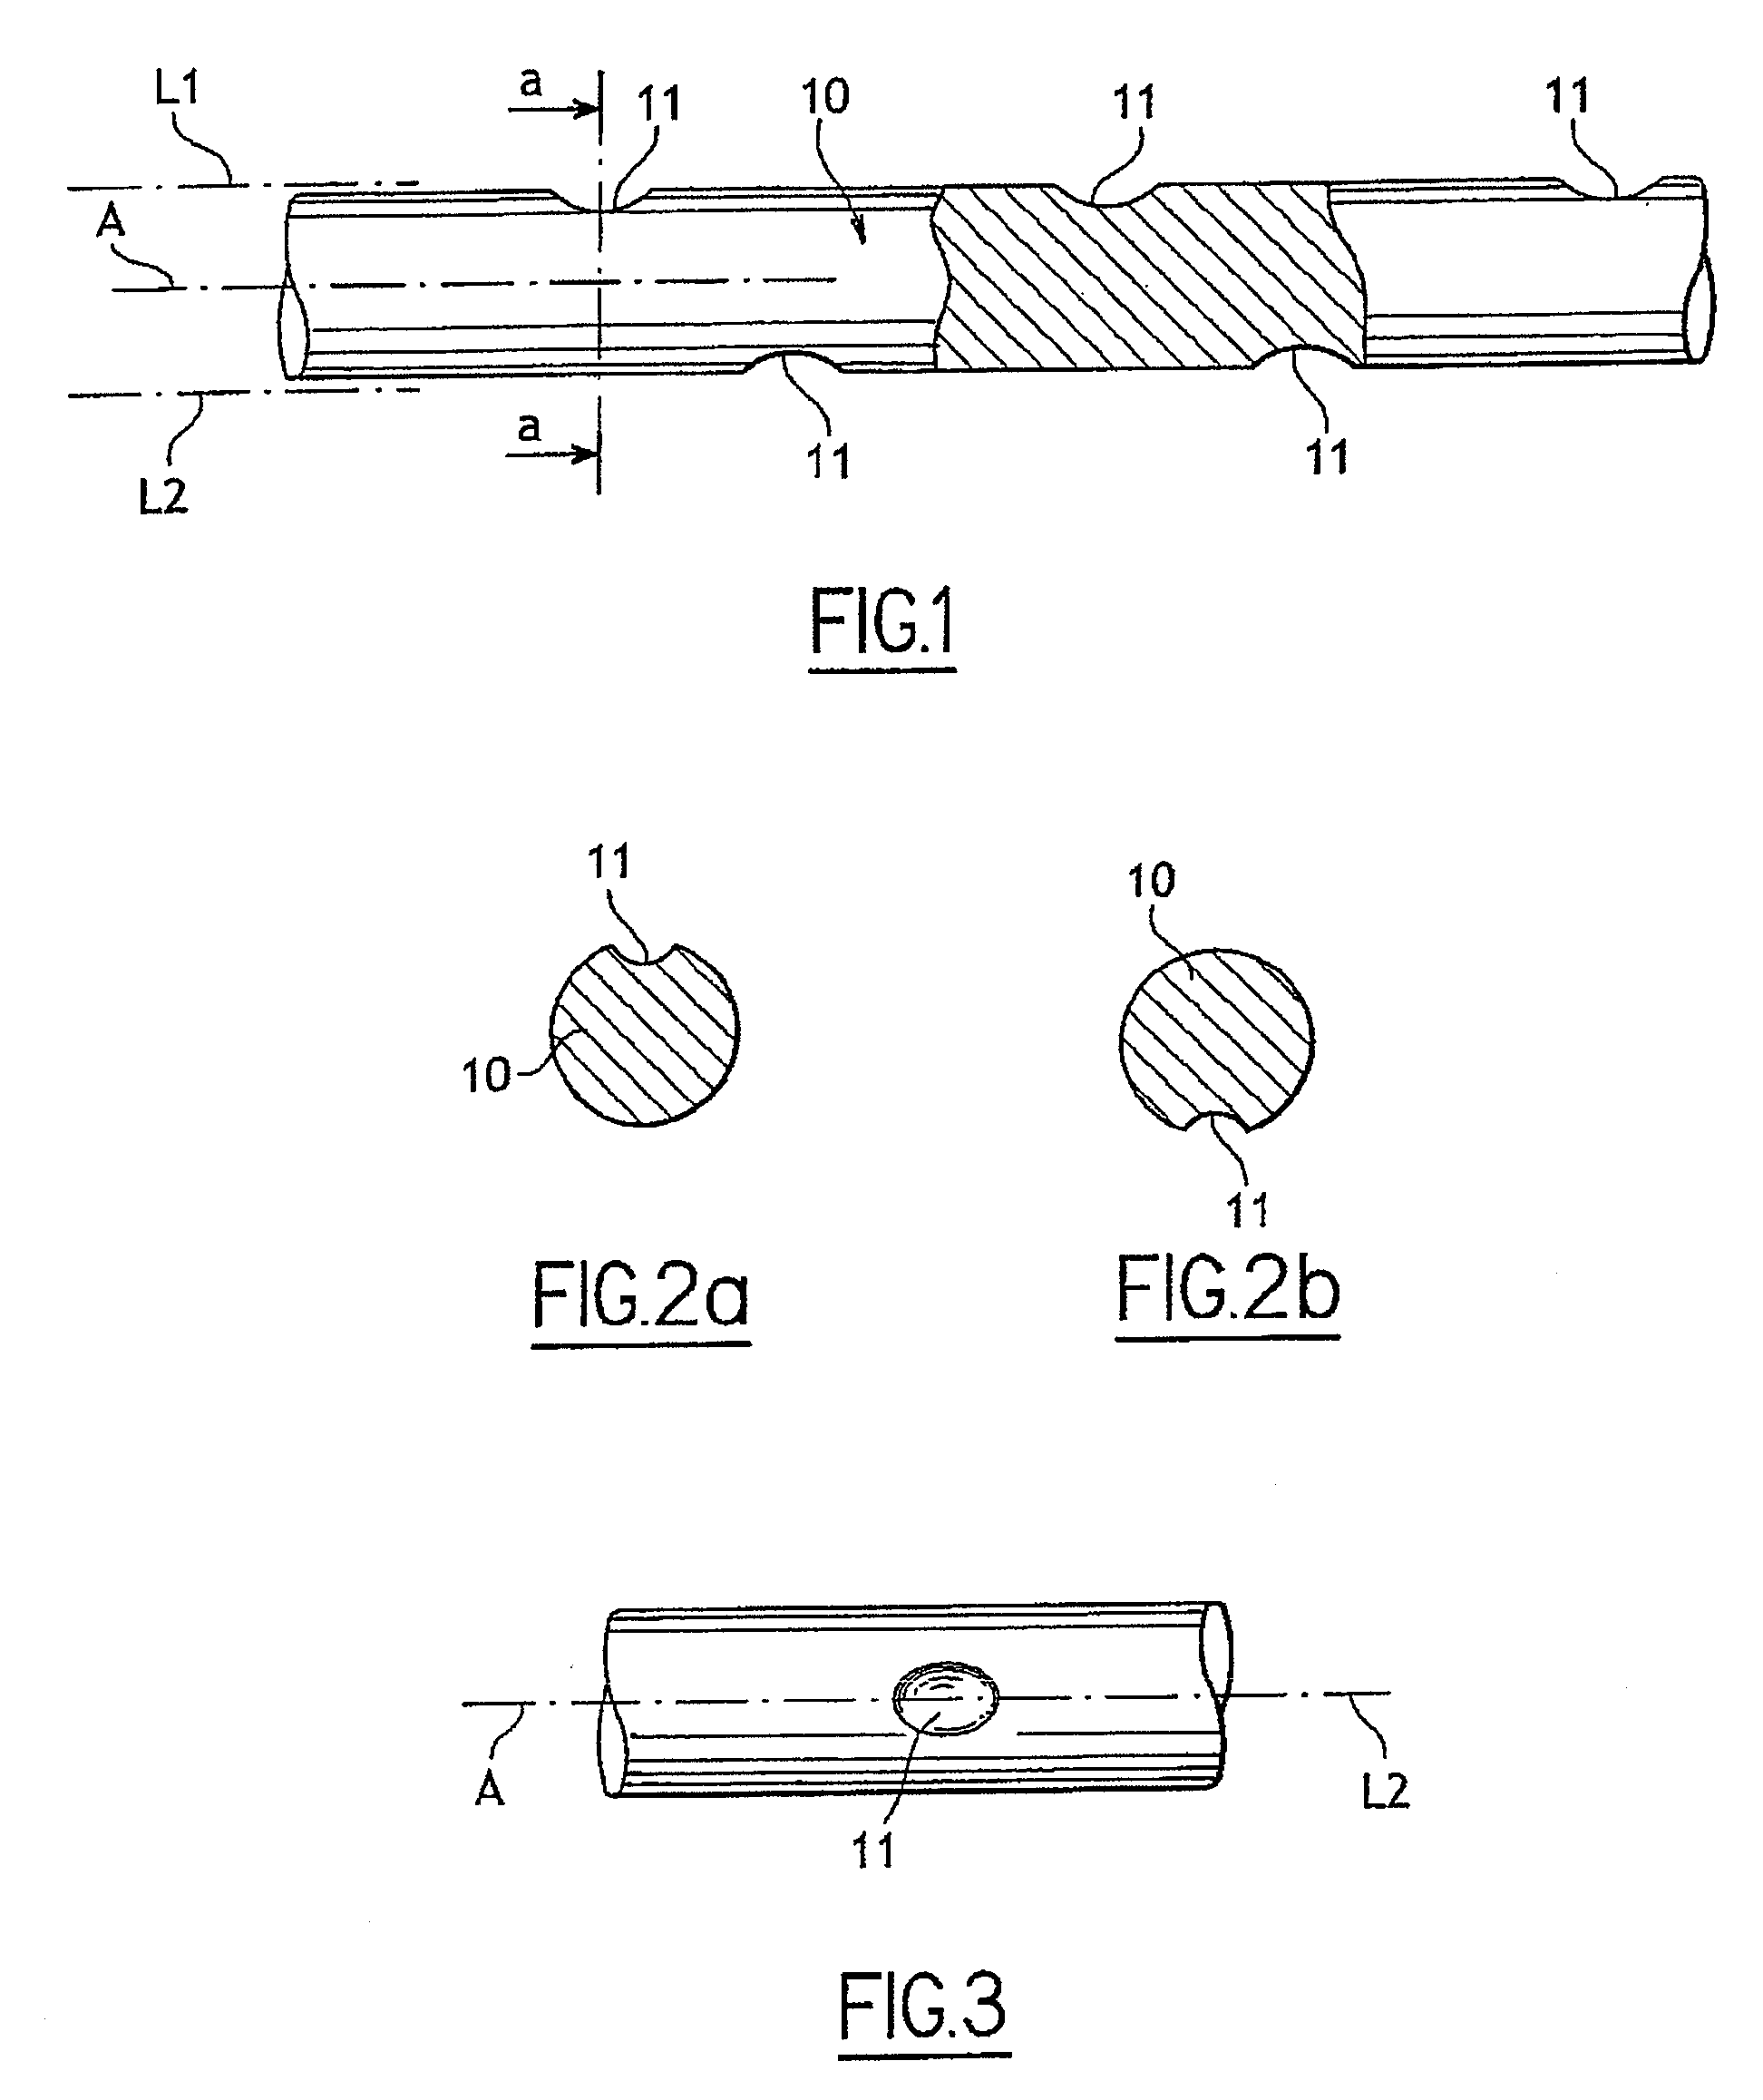 Noise-reducing cutting line for a vegetation cutting device